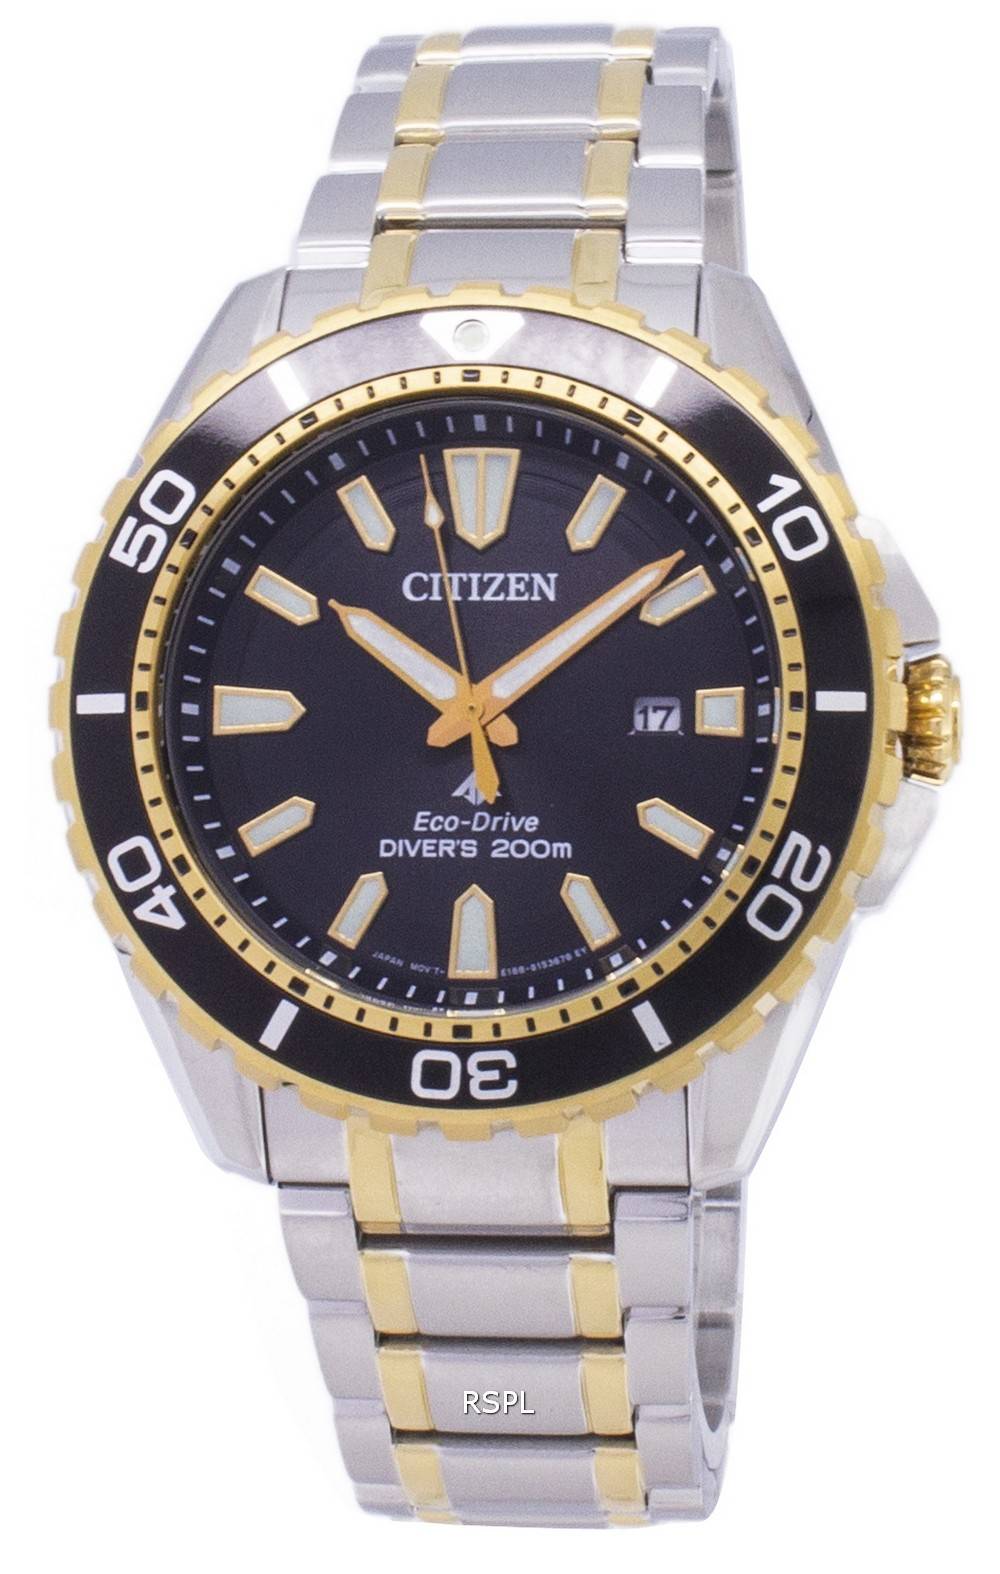 Citizen Eco Drive Promaster Diver Black Dial Two Tone Stainless Steel Watch For Men - BN0194-57E